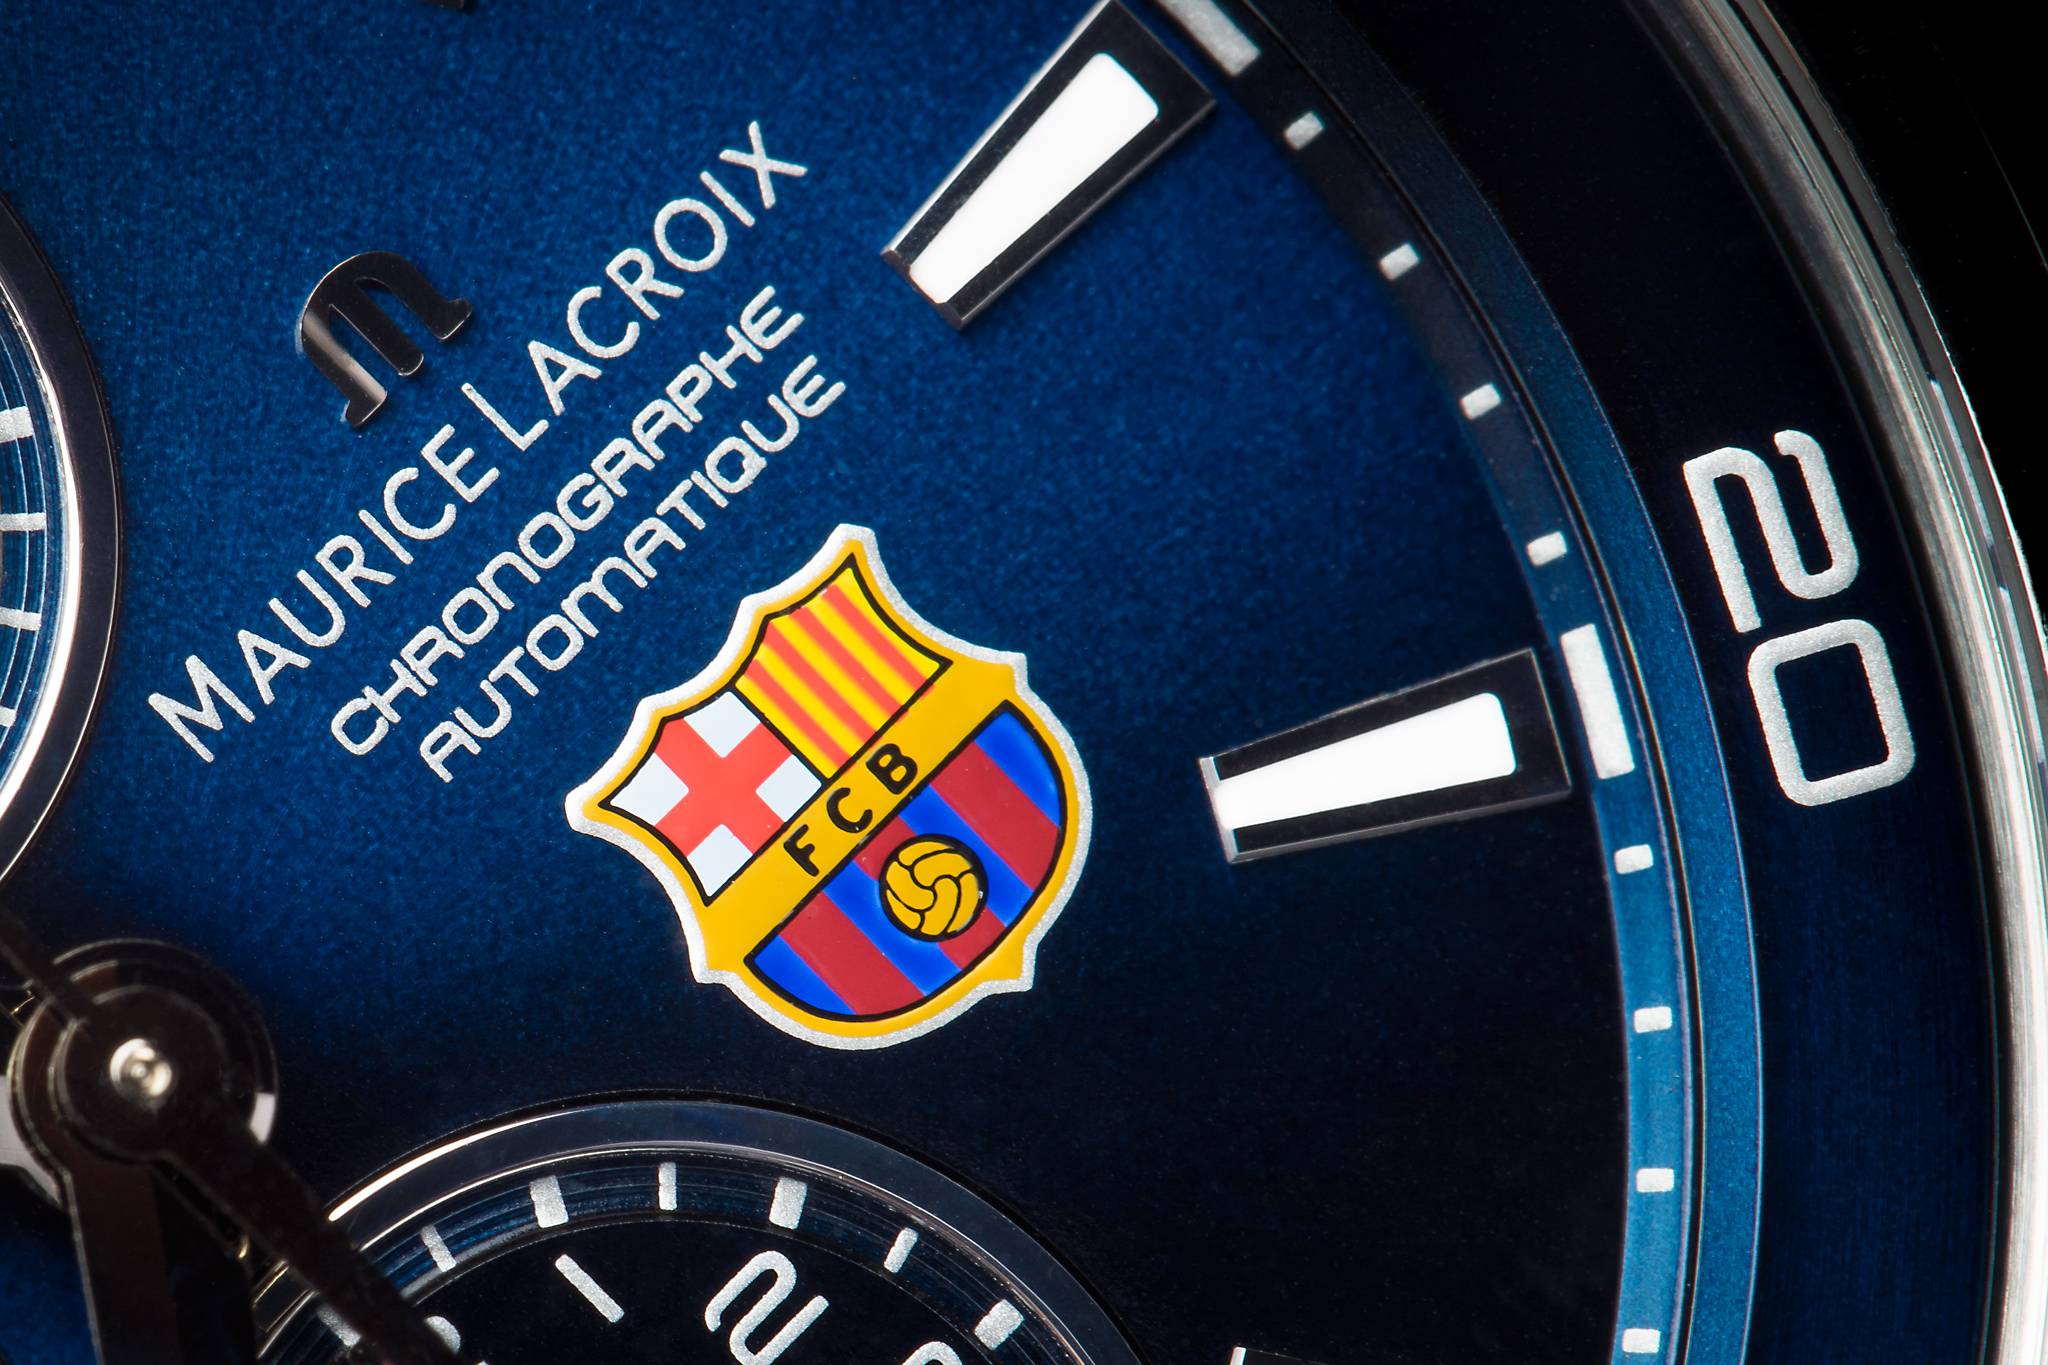 Hands On The Maurice Lacroix Pontos S FC Barcelona Official Watch crest